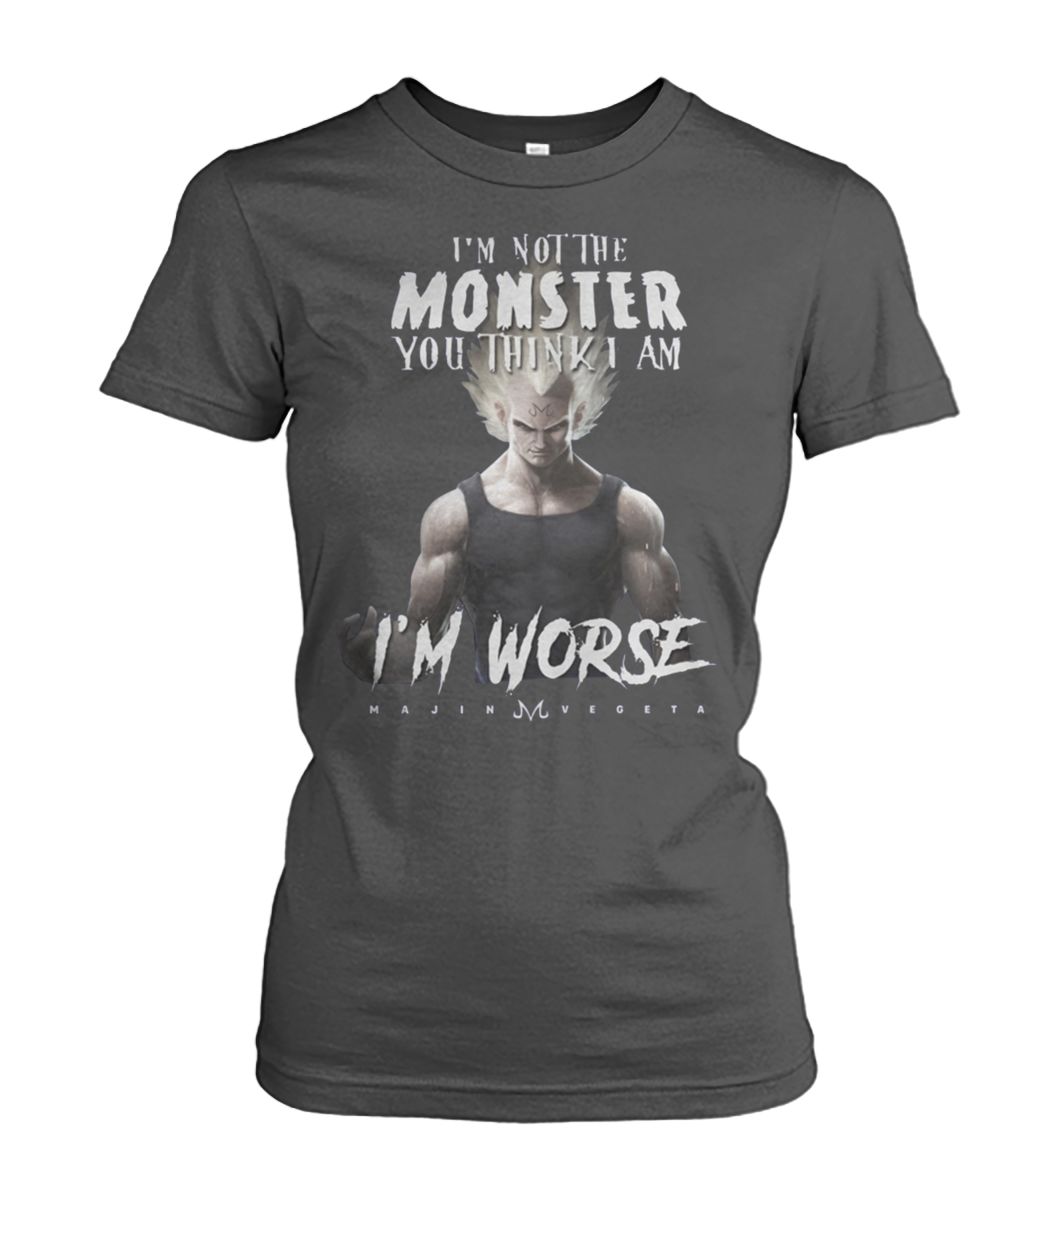 Dragon ball Z I'm not the monster you think I am I'm worse Goku women's crew tee